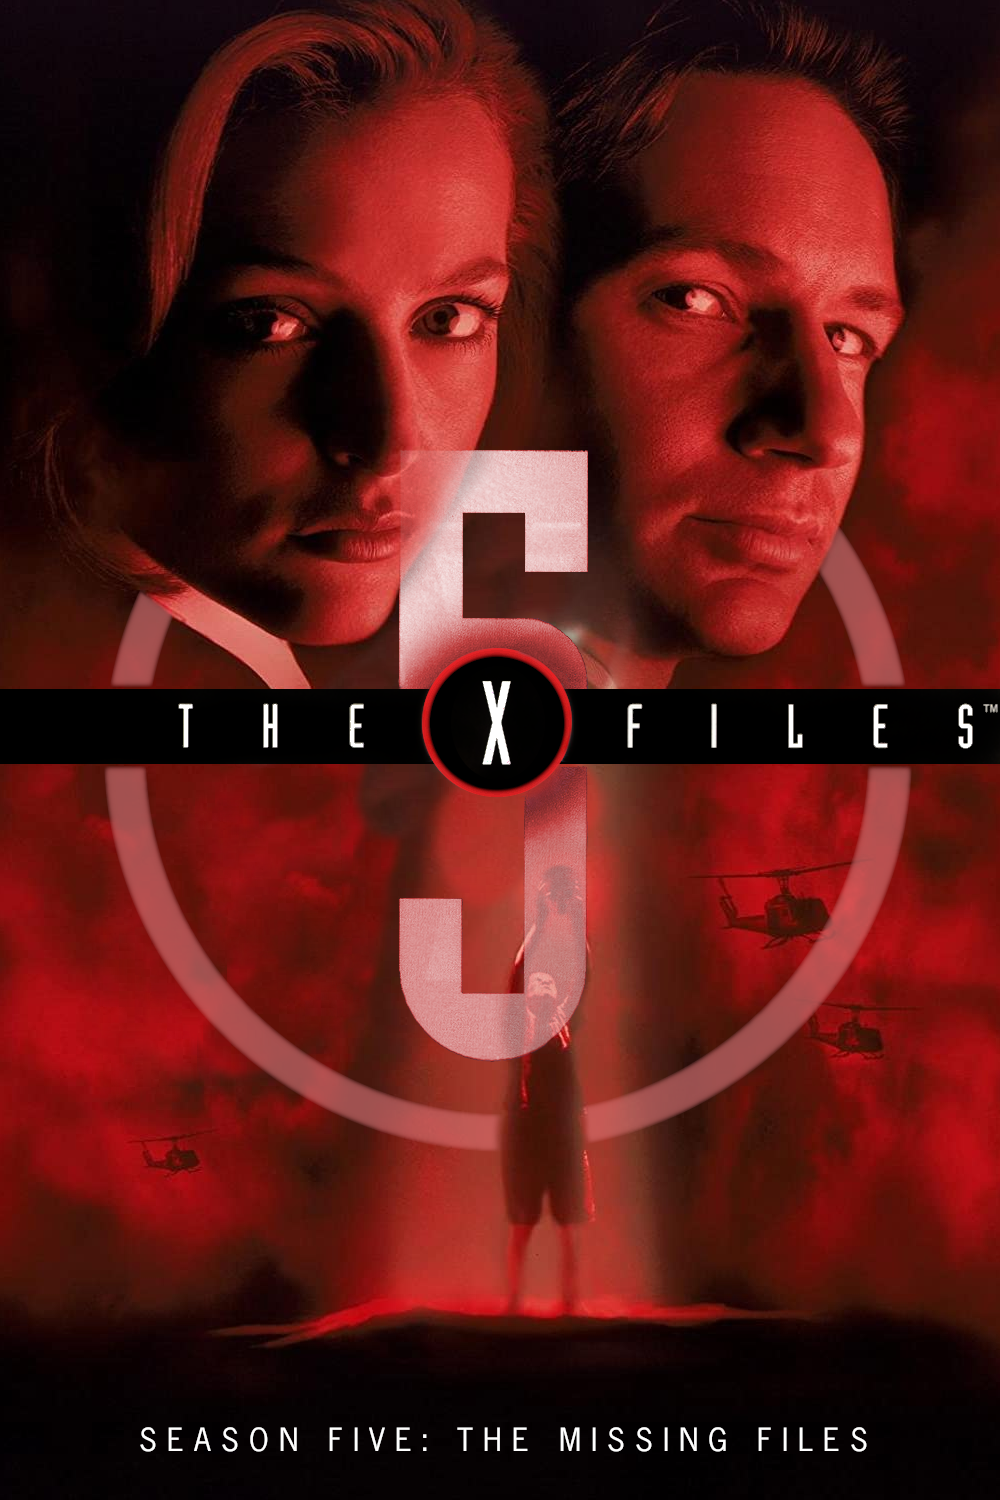 The X-Files: Season 5 - The Missing Files